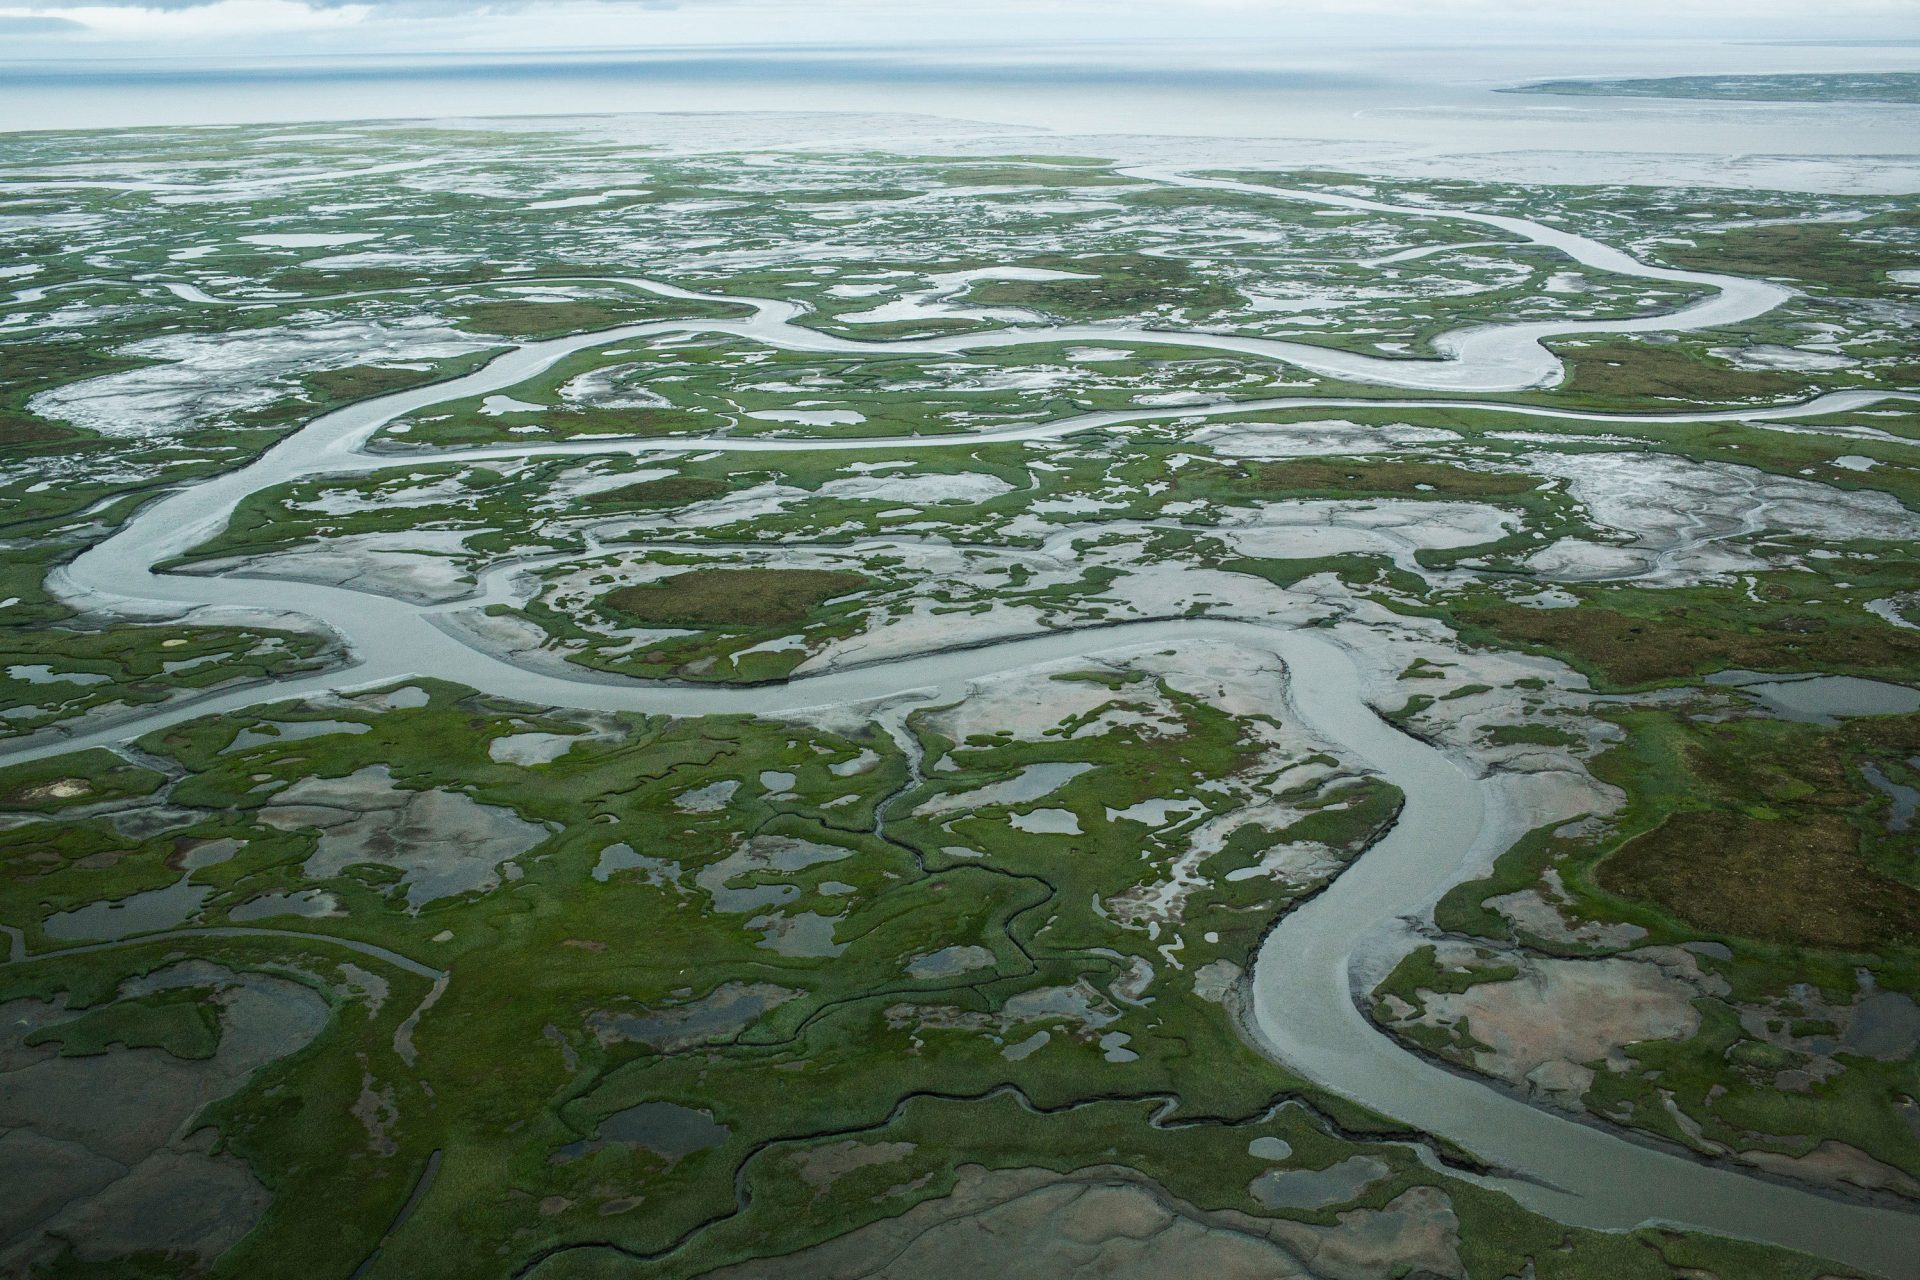 A marshy tundra landscape surrounds Newtok in the warmer months. The increased melting of sea ice is causing the Ninglick River to widen, eroding the riverbank. Larger storms that come in from the Bering Sea further erode the land.